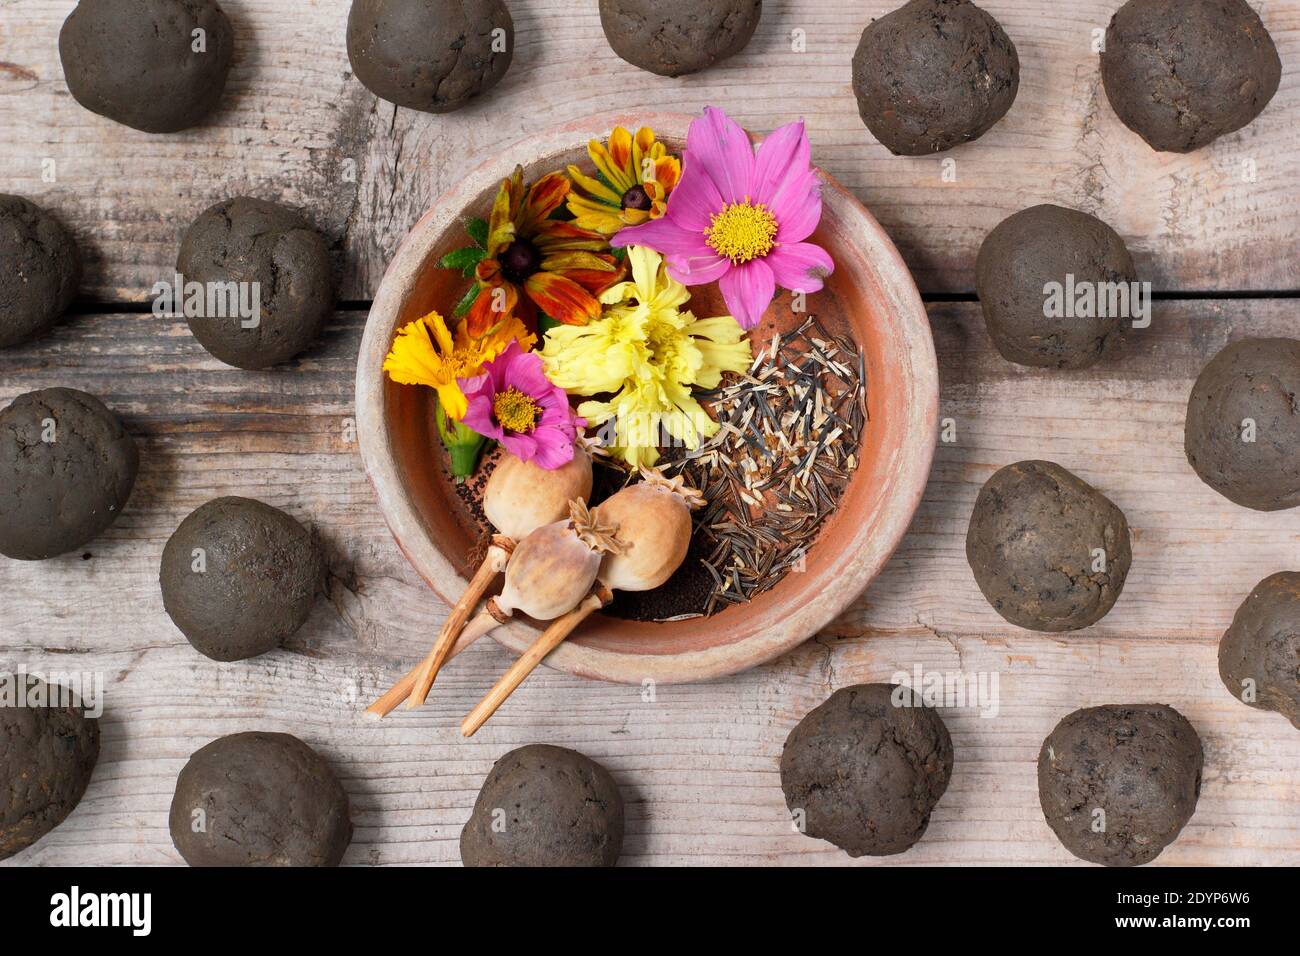 Ingredients for making flower seed bombs - clay soil made into rounds, various seeds and optional petals for decoration. UK Stock Photo